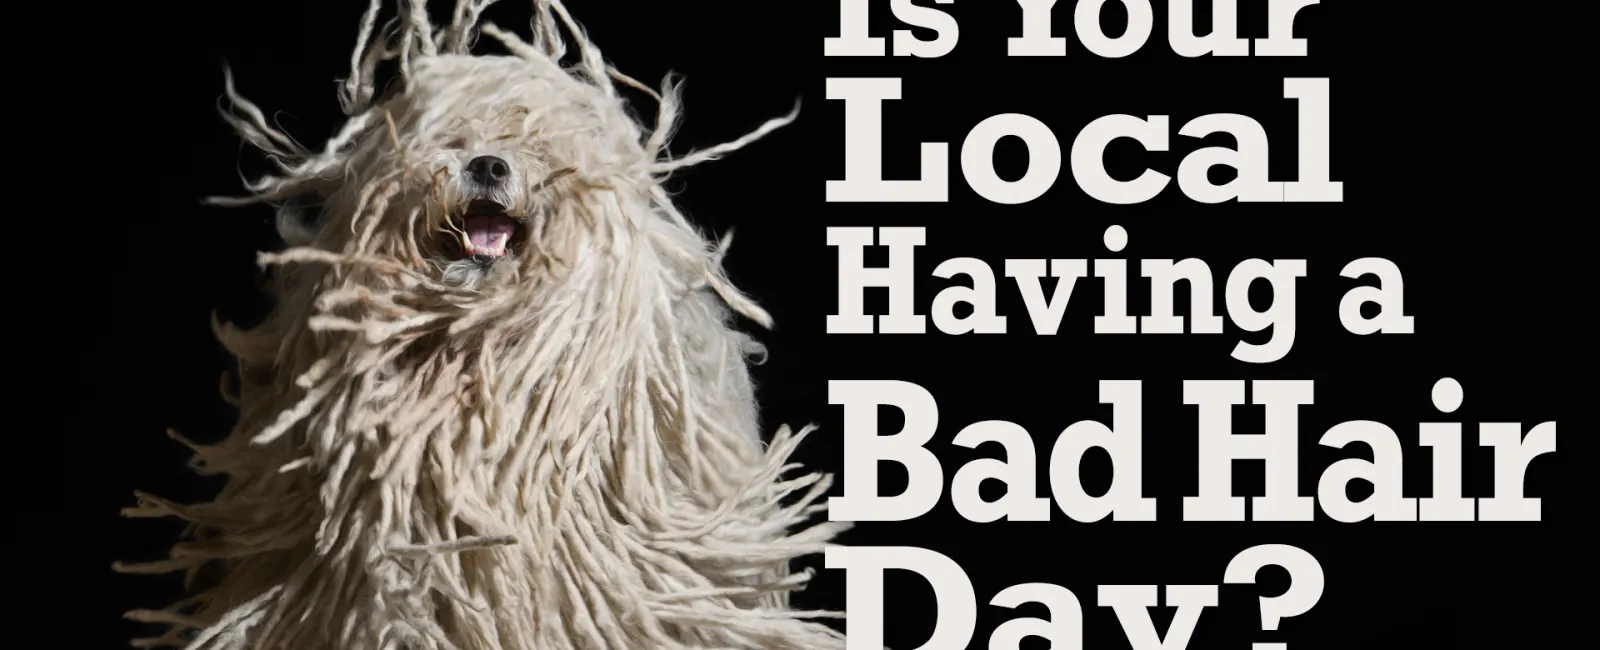 Is Your Local Having a Bad Hair Day?